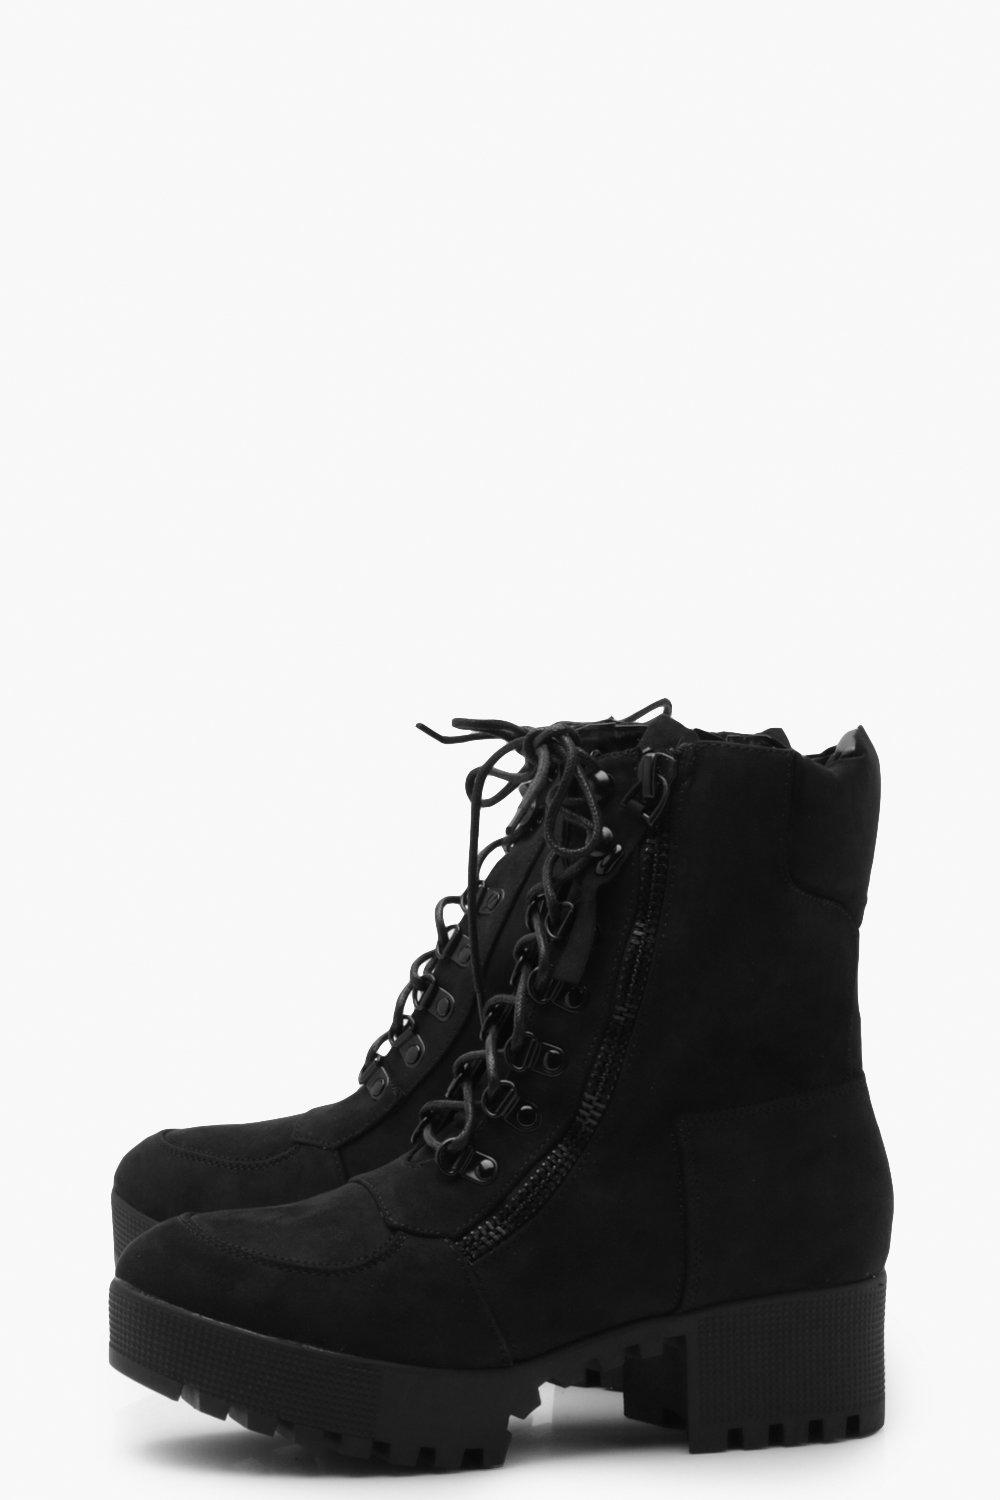 leather slope heel boots